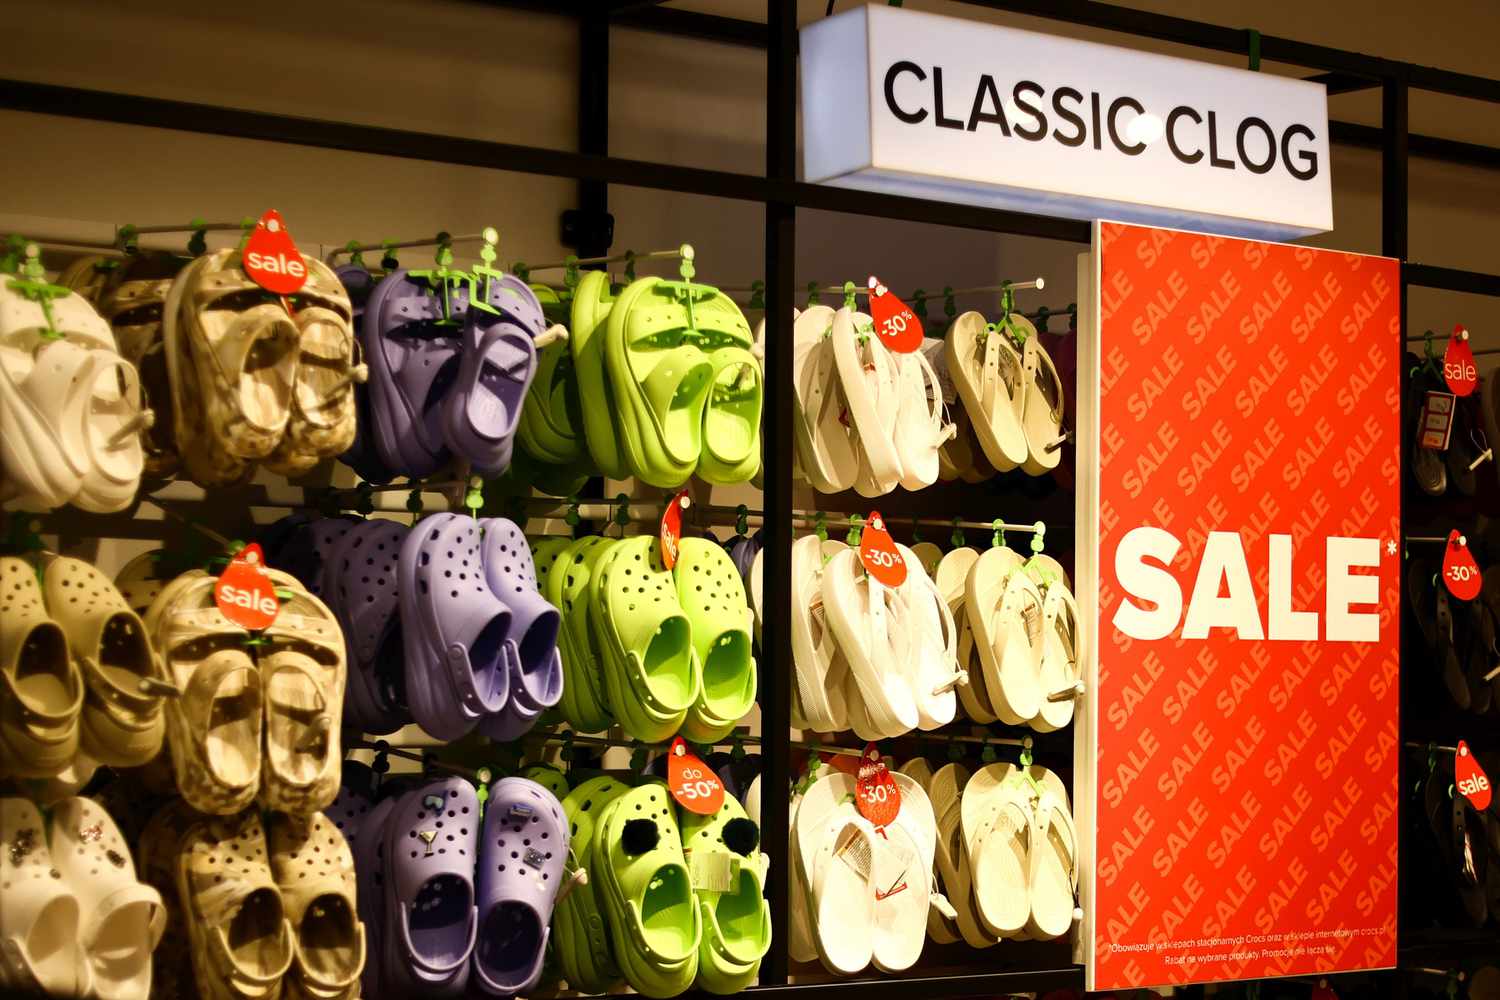 Crocs Stock Jumps on Record Revenue as Demand for Its Footwear Kicks Up Sales [Video]